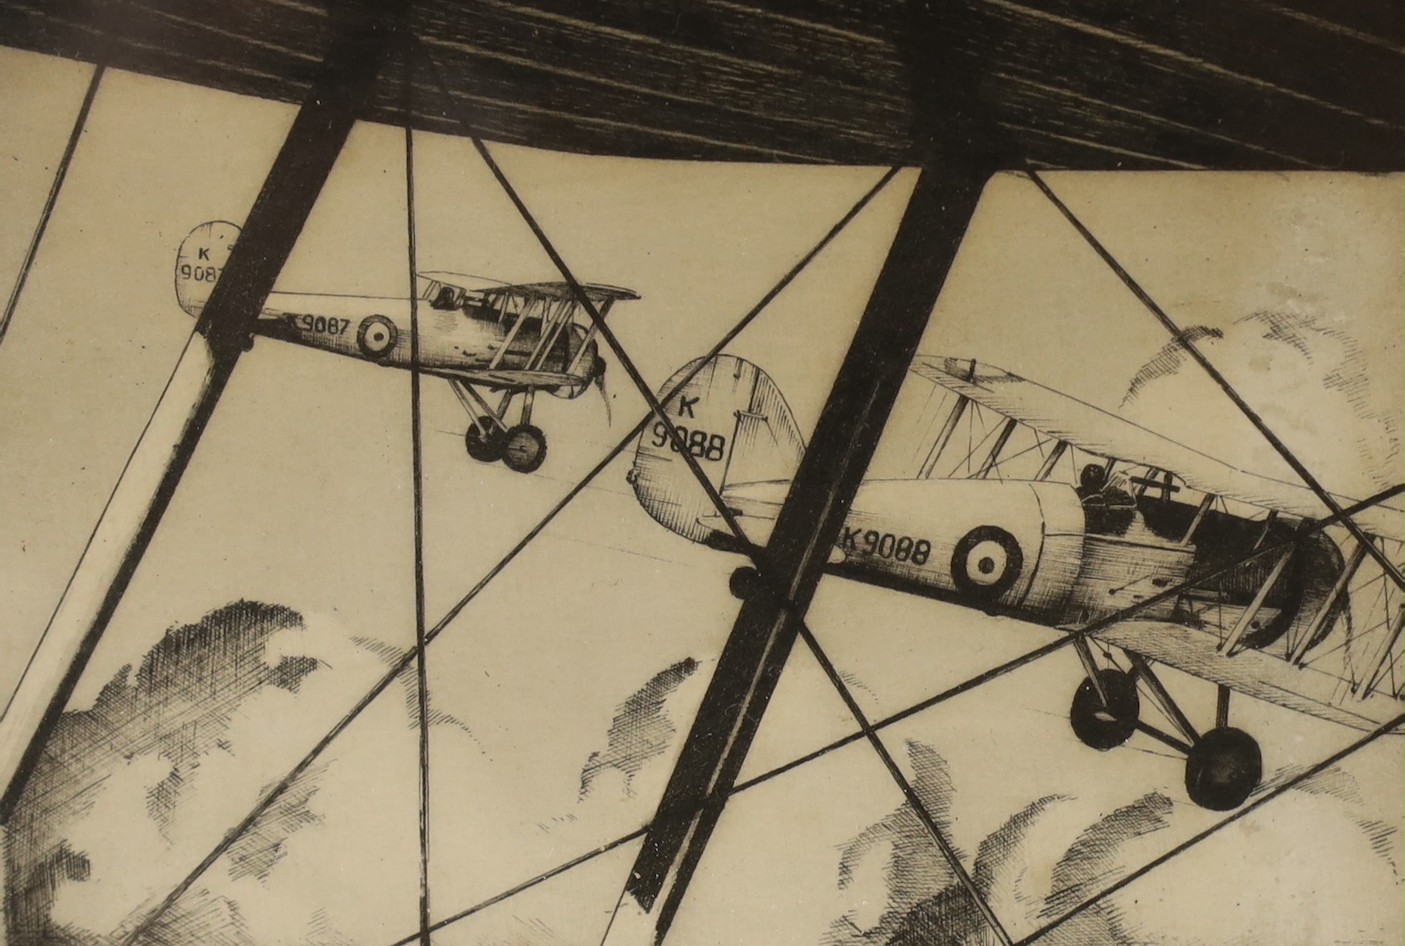 Howard Leigh (1909-1942), three etchings, 'Junker monoplane', 'Pfalz D XII' and 'Gloster Gauntlets', two signed in pencil, one in the plate, largest 13x 10cm